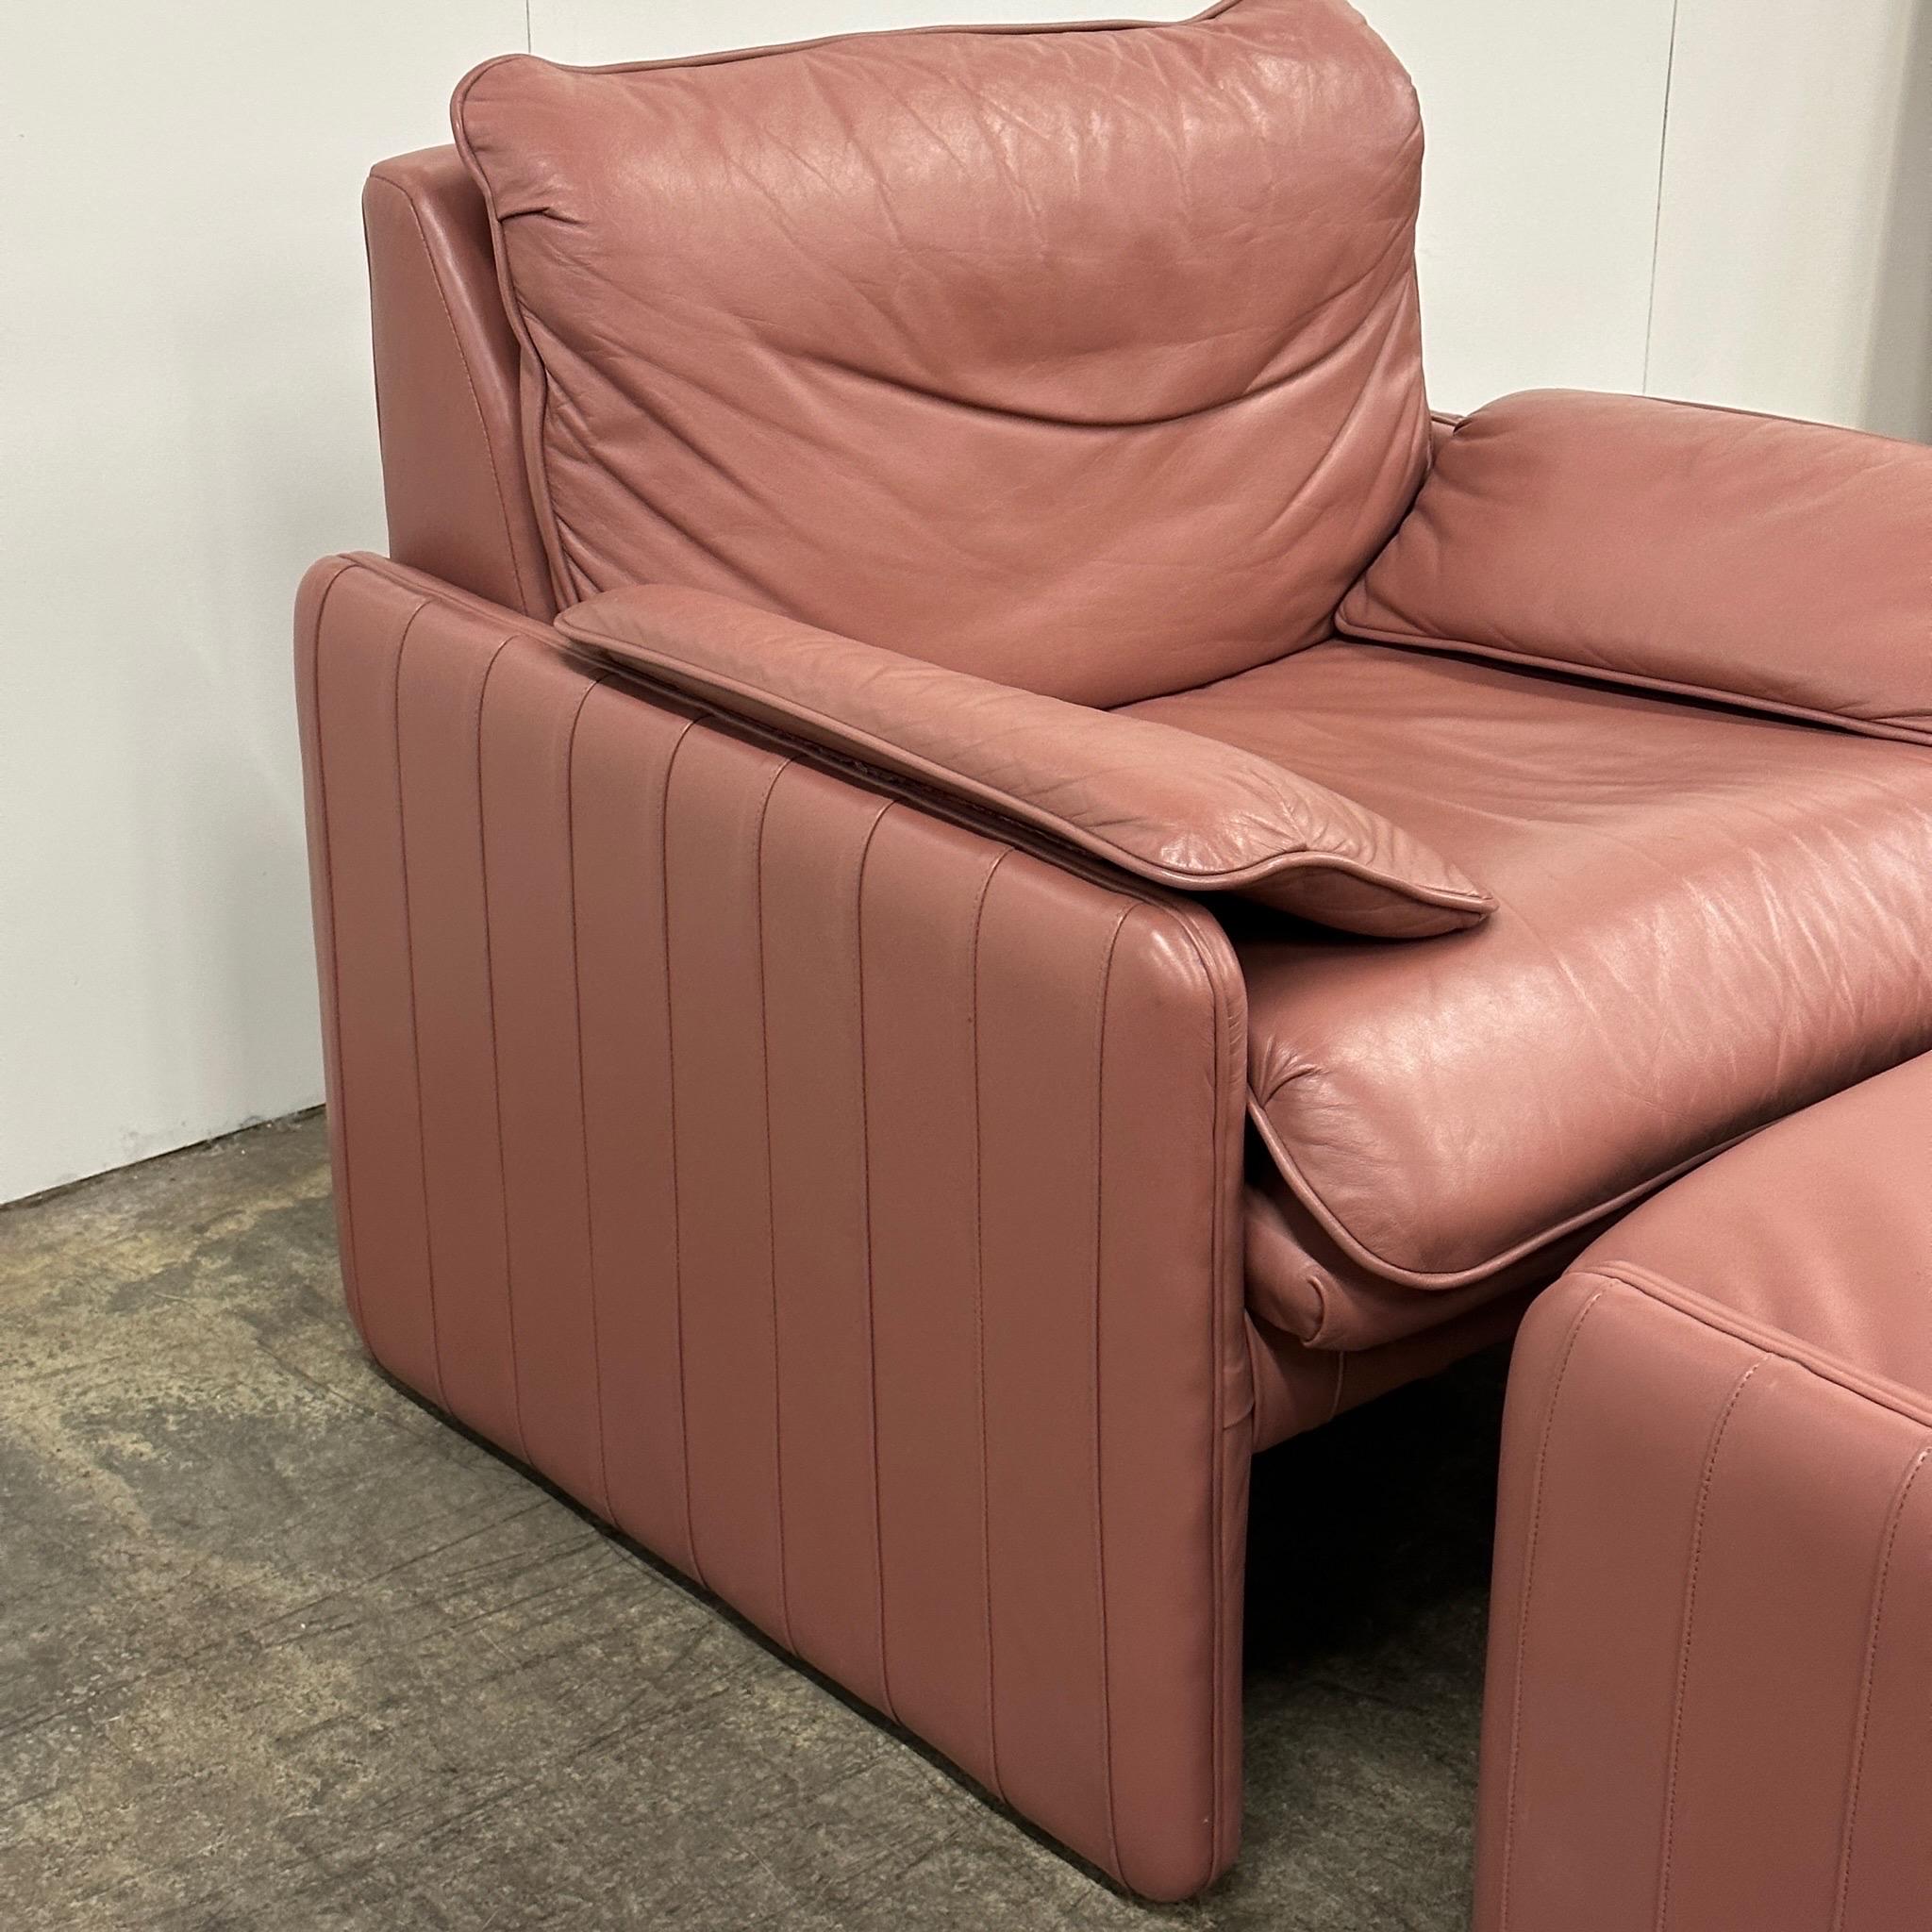 c. 1980s. Price is for the set. Contact us if you’d like to purchase a single item. Made in North Carolina. Top grain leather dyed mauve. 

Ottoman dimensions are 27”L x 22”W x 14.5”H  